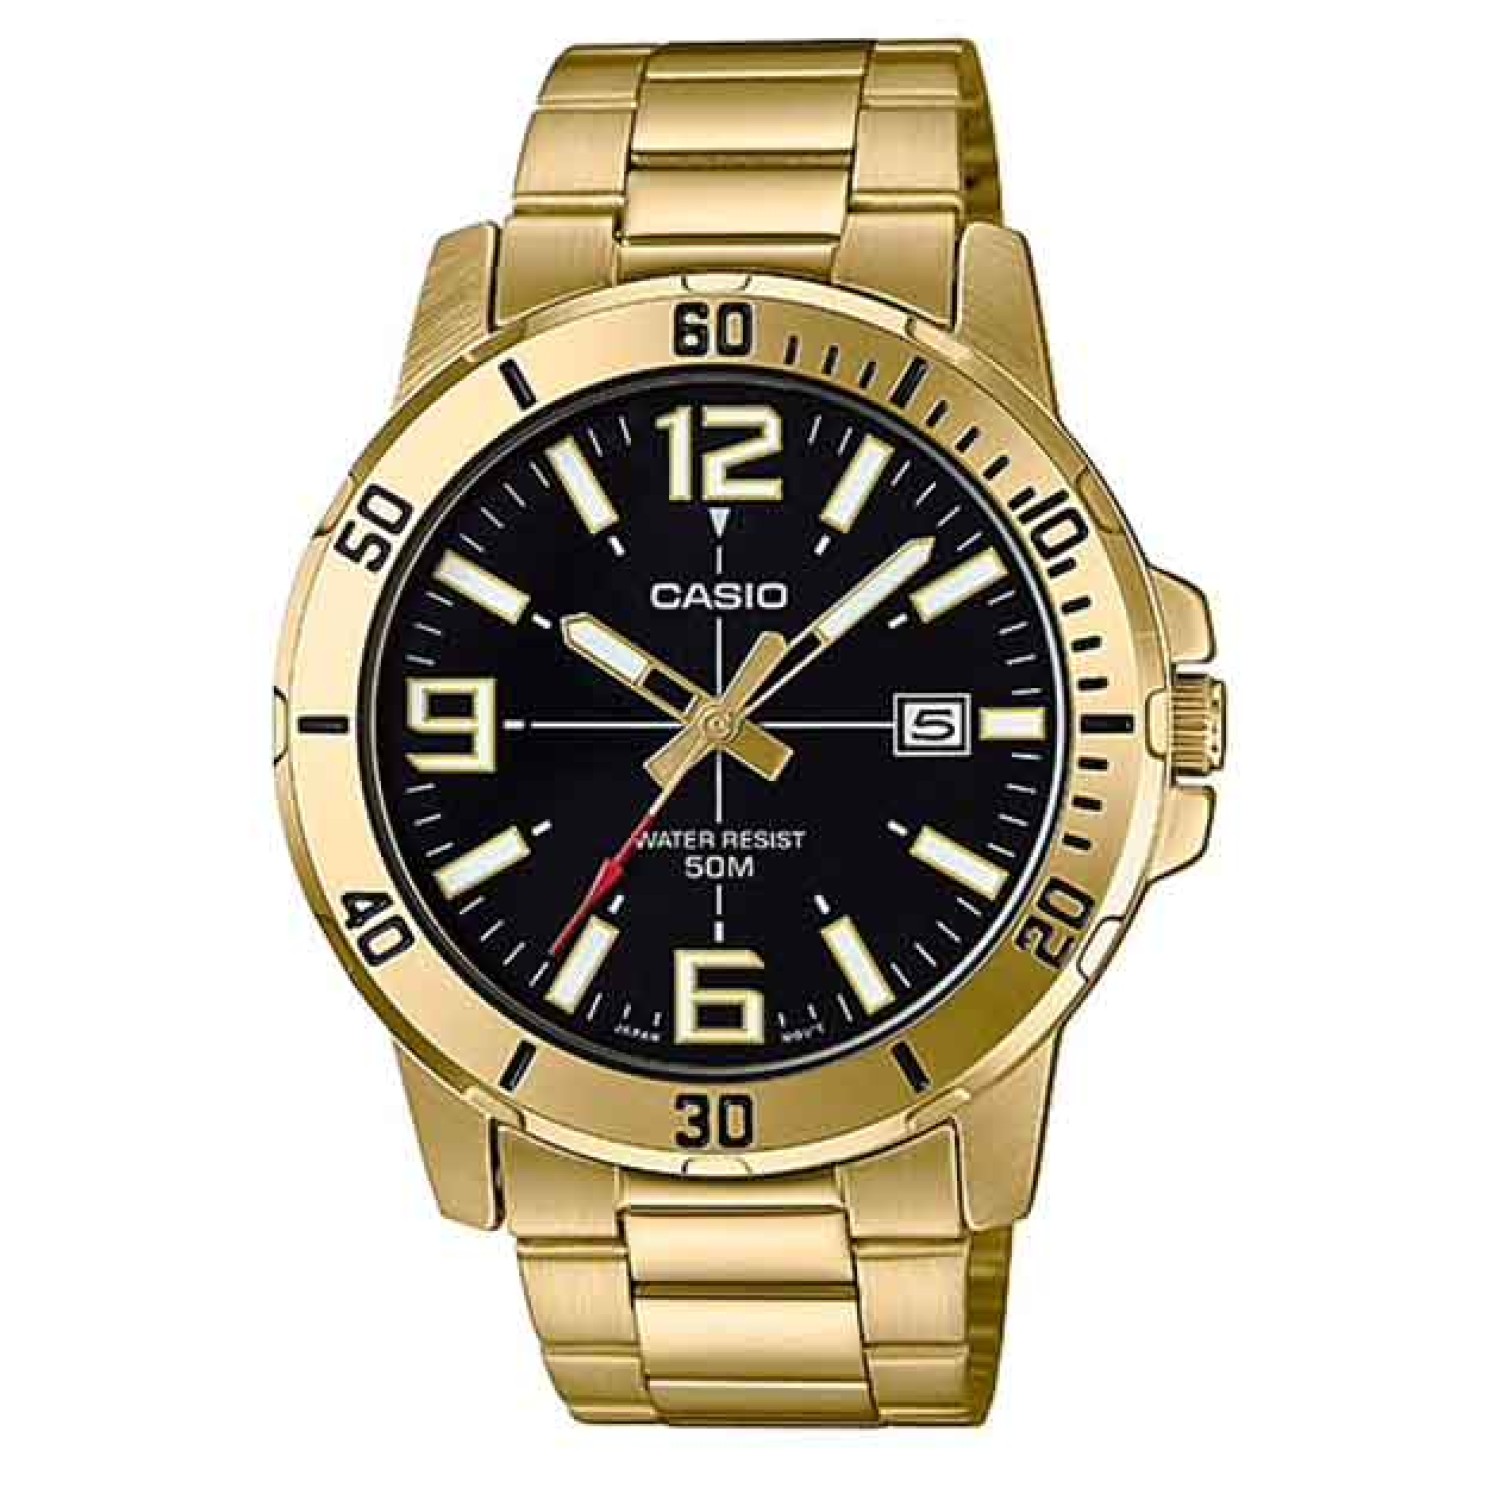 MTP-VD01G-1B Casio Mens Stainless Steel Gold Watch. From Casio a series of analogue stainless steel IP Gold plated watches with clear easy to read dials and a 50 metre water resist rating making them ideal for everyday wear.   2 Year Casio Guarante @chris